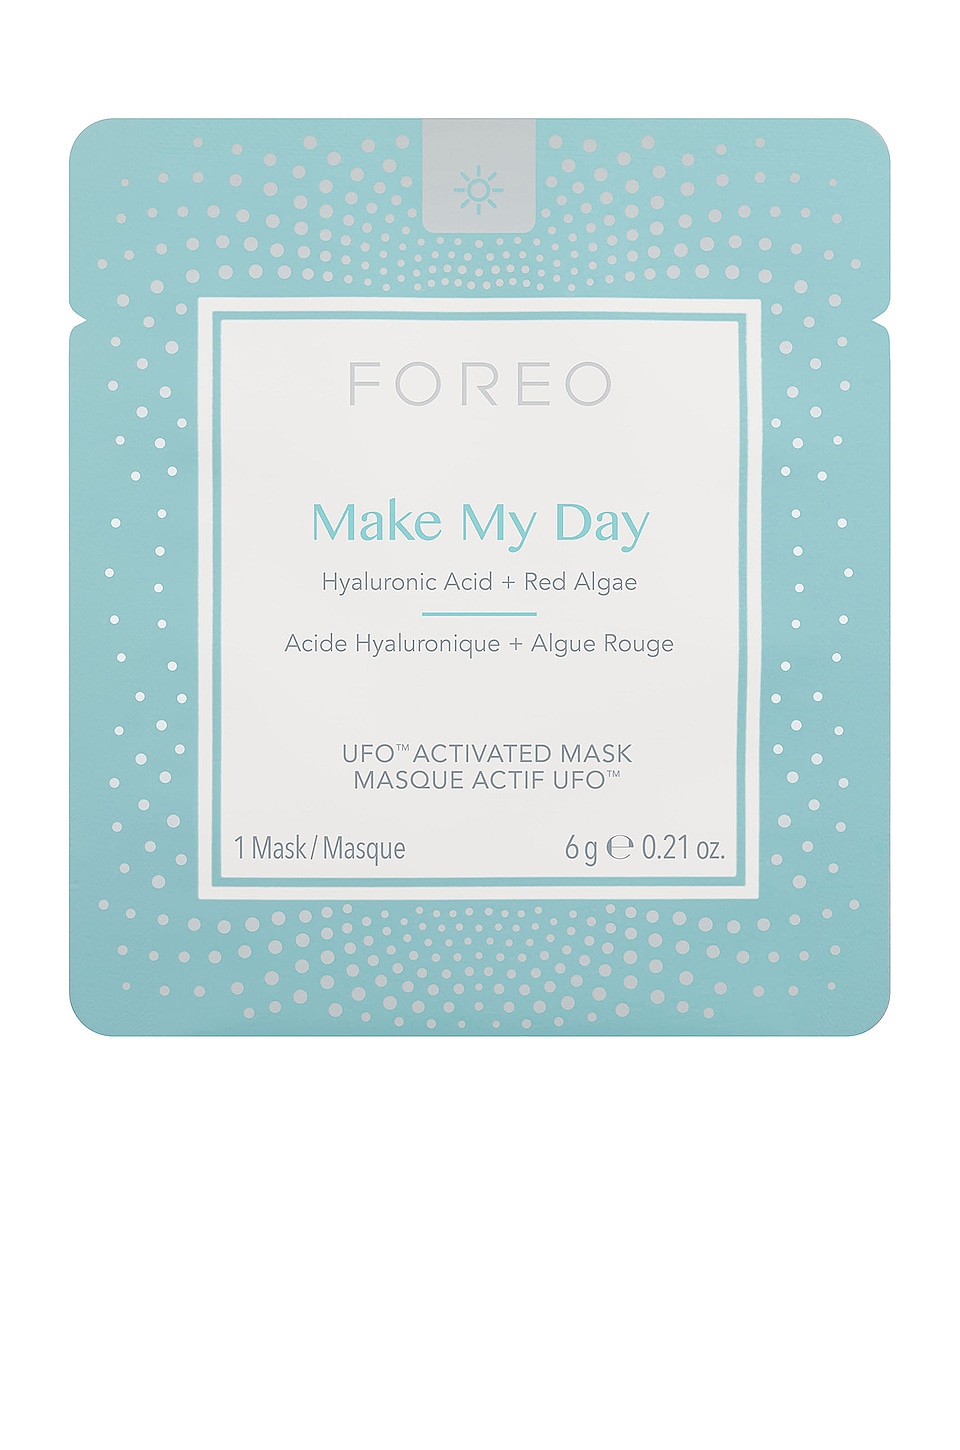 FOREO MASK MAKE MY DAY 7 PACK